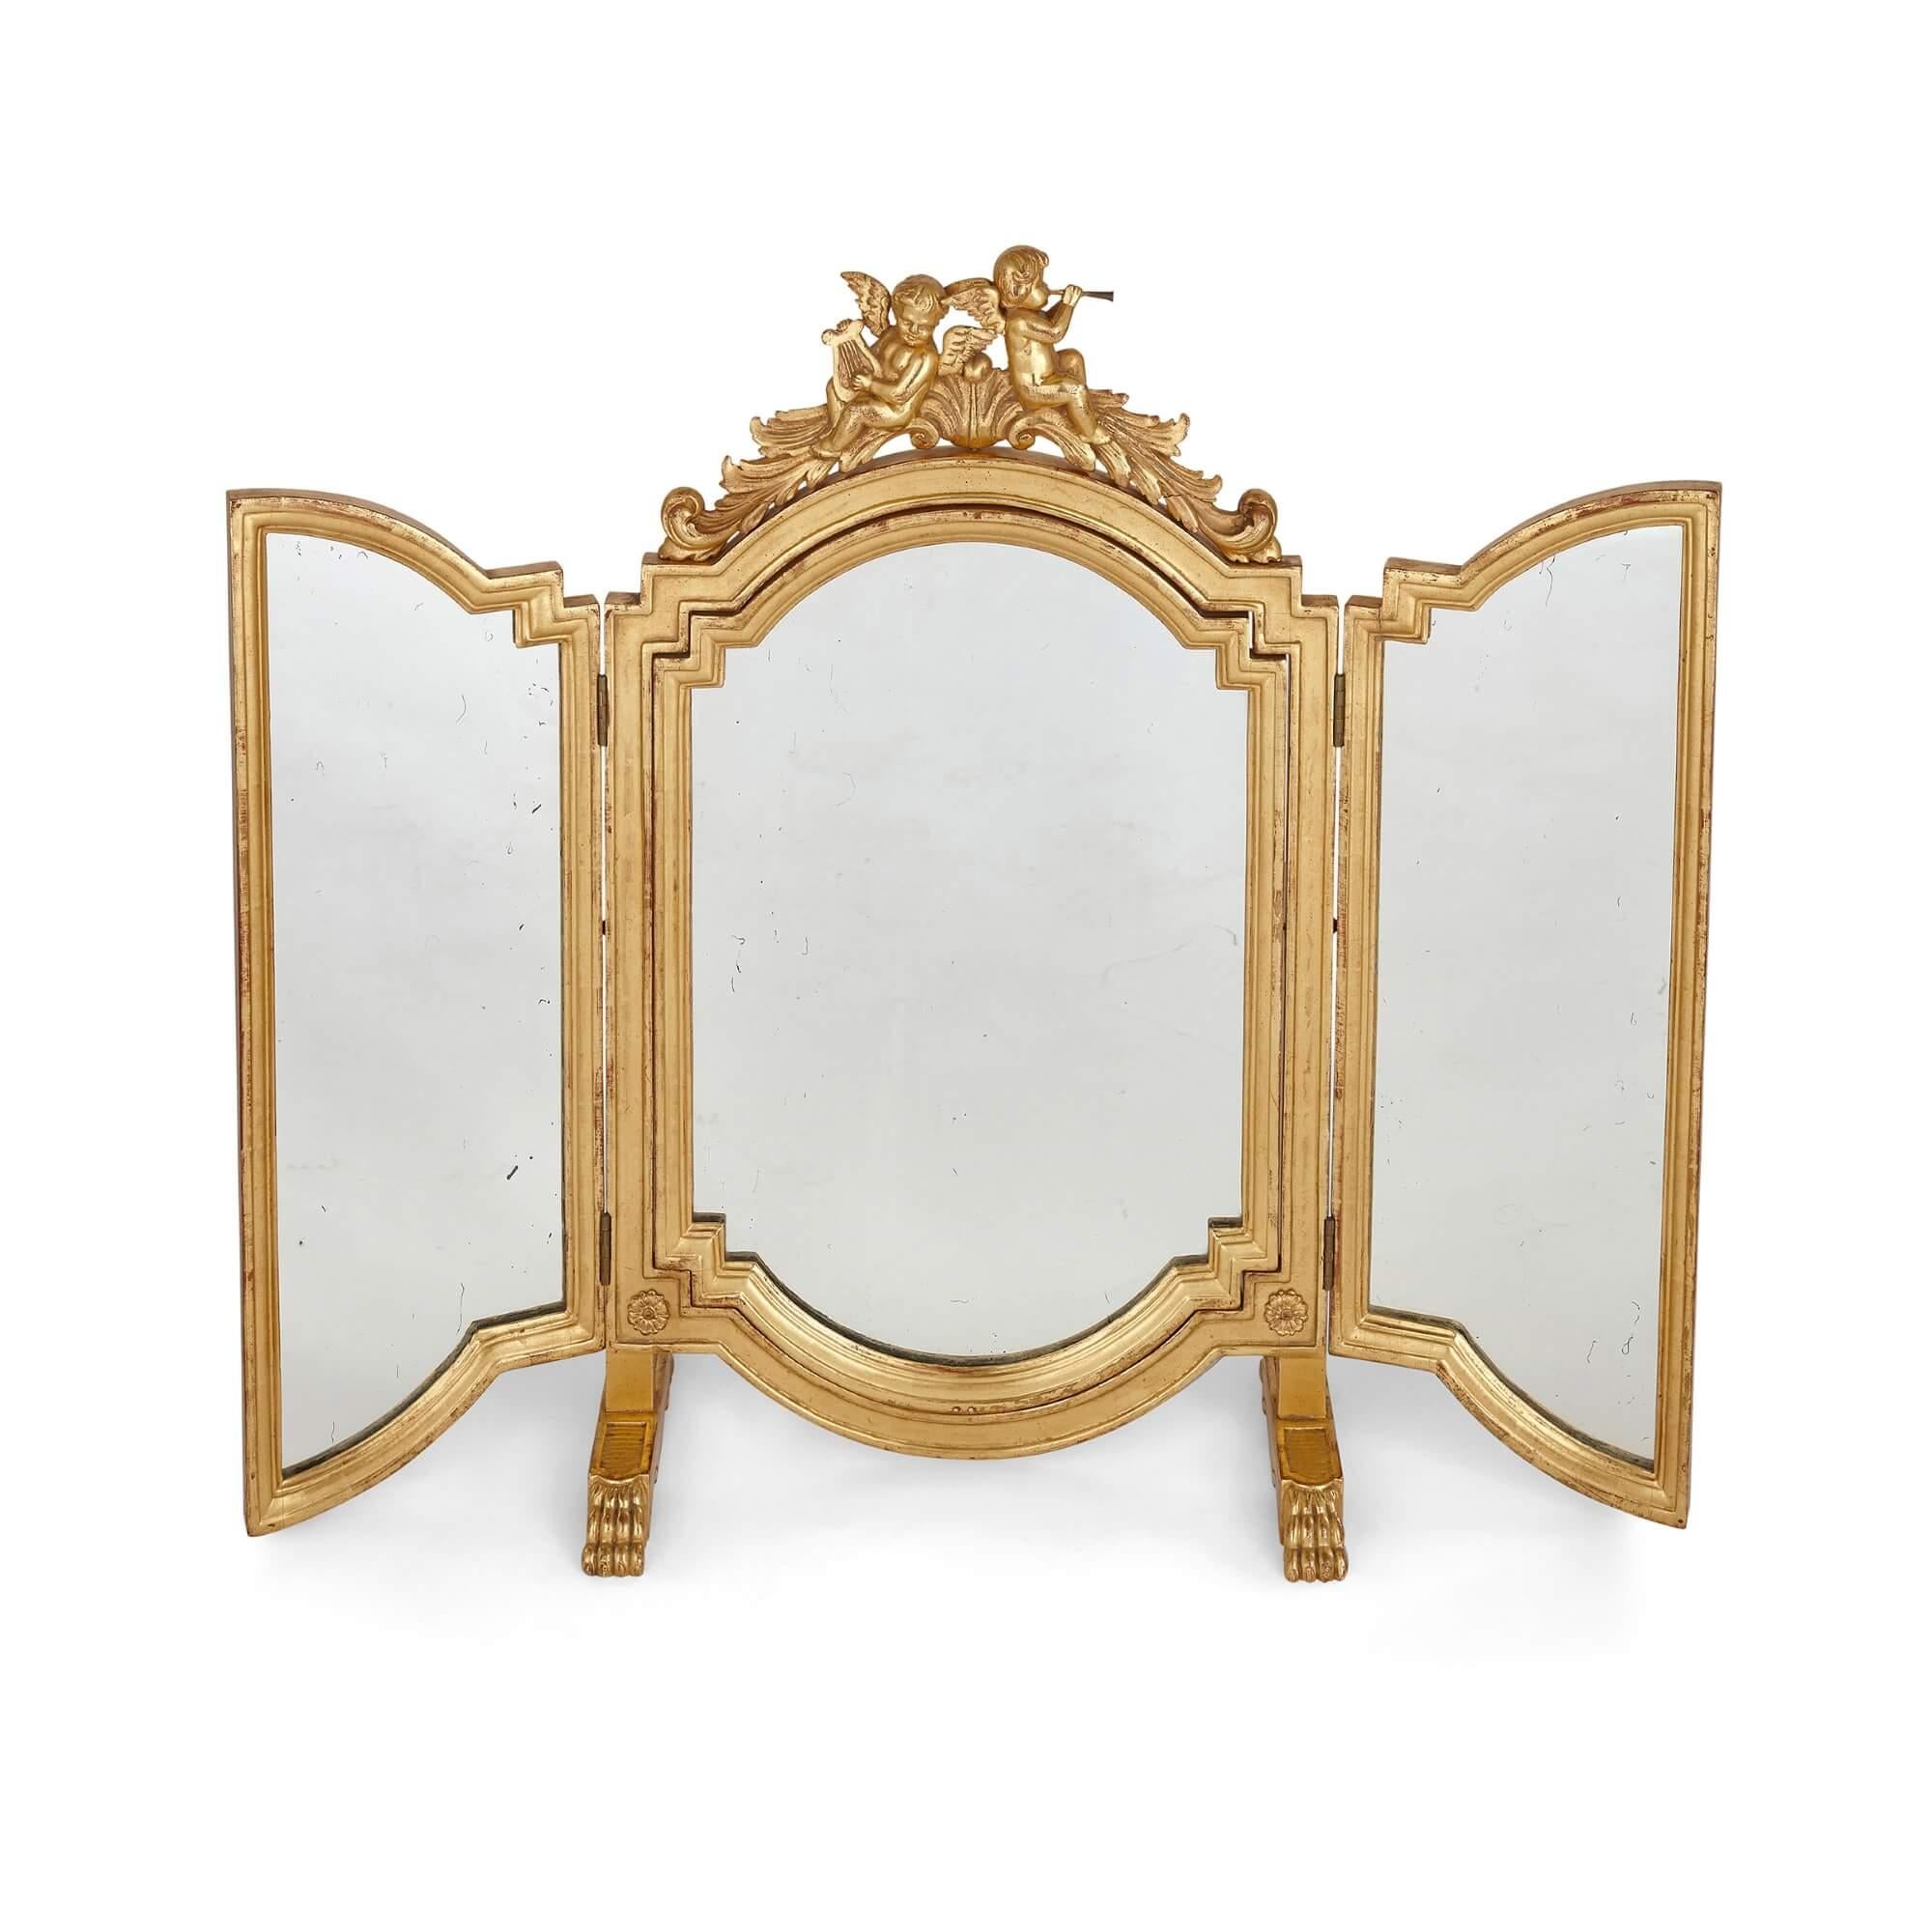 Antique French giltwood folding mirror
French, late 19th century
Measures: Height 80cm, width when open 97cm, width when closed 49cm, depth 23cm

This elegant giltwood mirror is modelled as a triptych: the front of the mirror features two doors